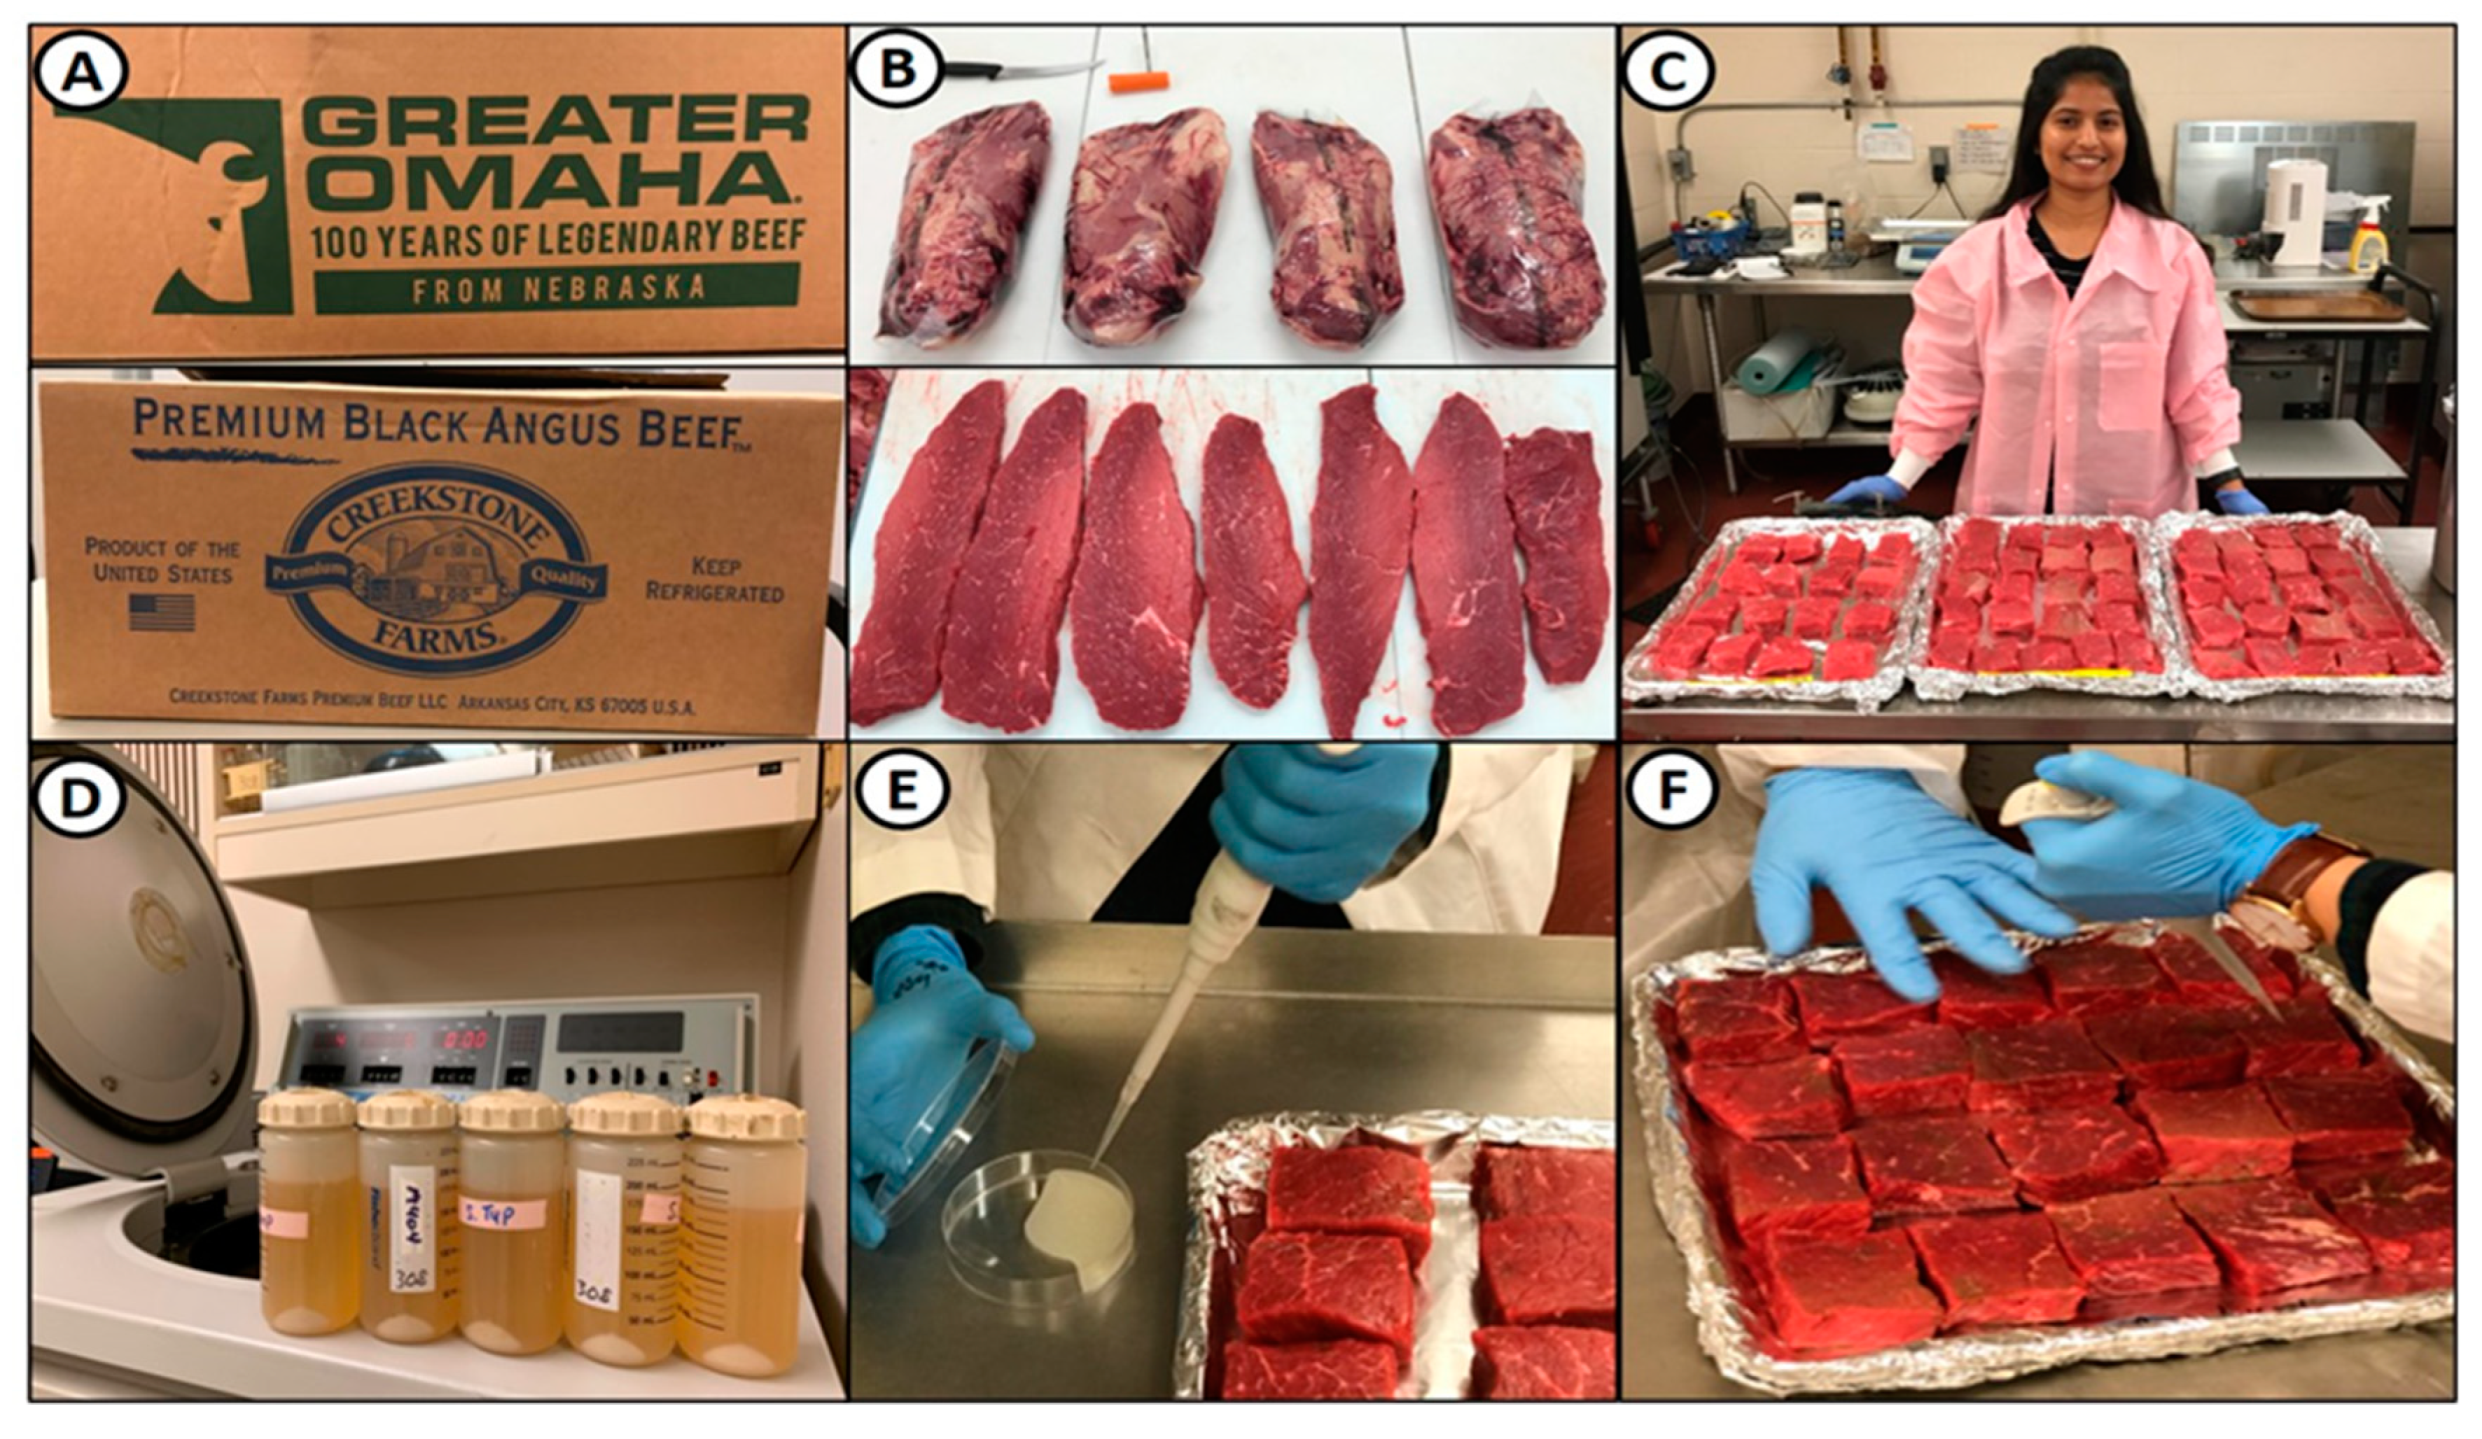 Microorganisms | Free Full-Text | Effect of Biltong Dried Beef Processing  on the Reduction of Listeria monocytogenes, E. coli O157:H7, and  Staphylococcus aureus, and the Contribution of the Major Marinade Components